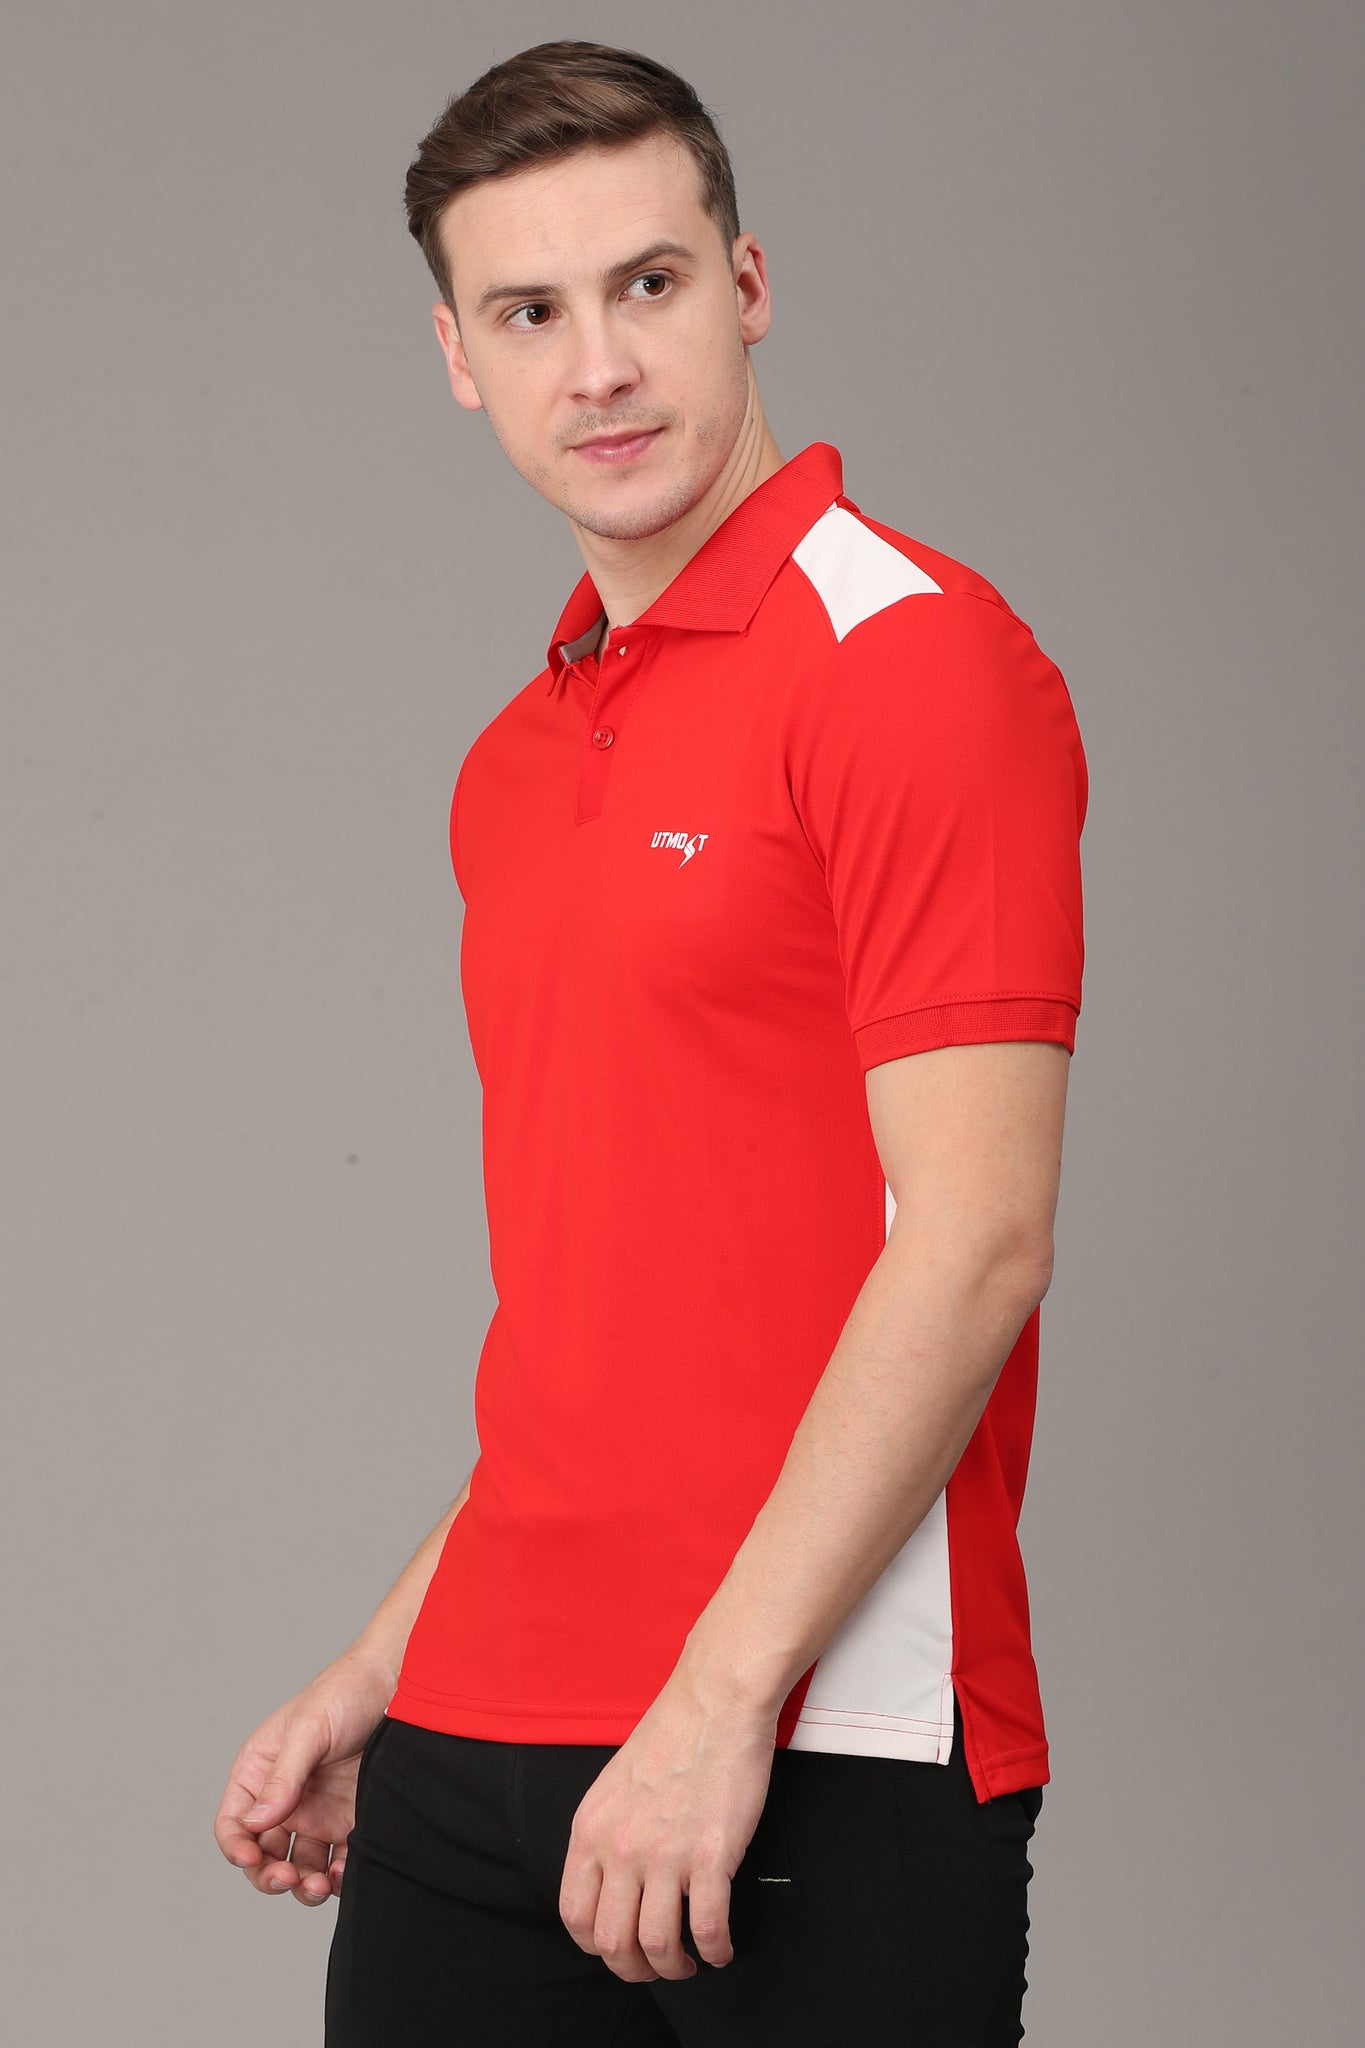 White Strip on Red Polo T-Shirt